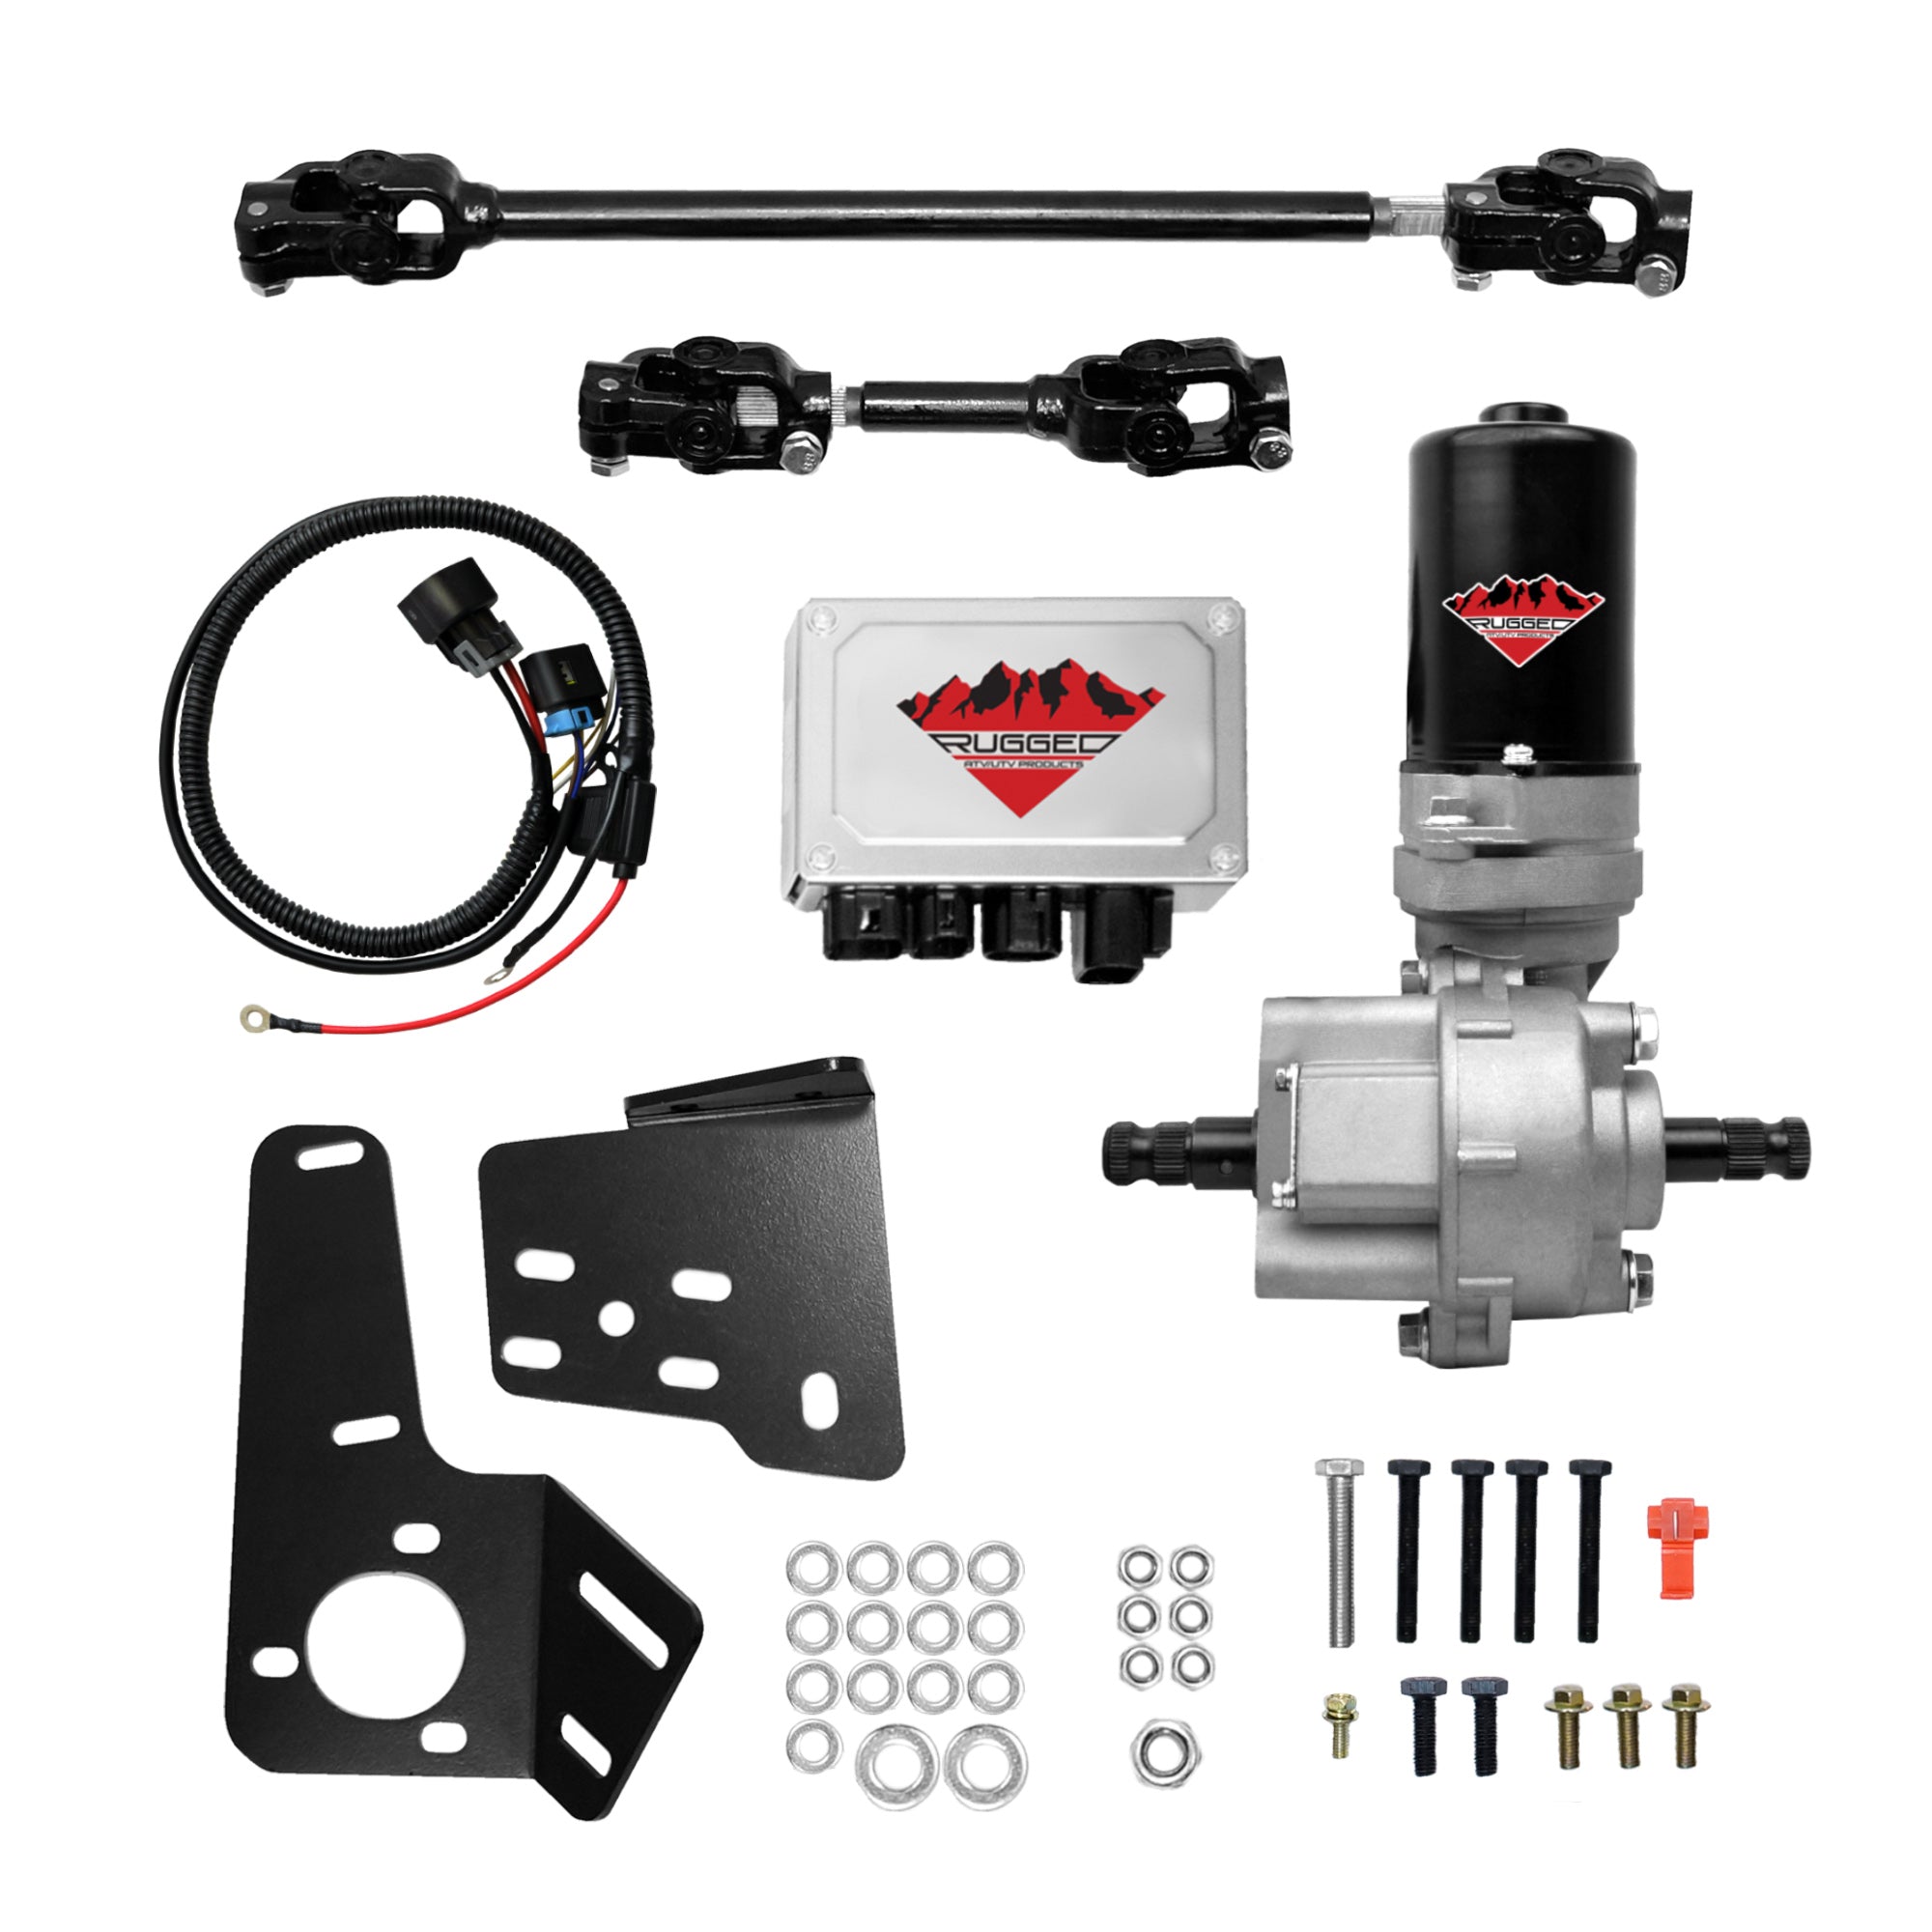 Electric Power Steering Kit | Demon Powersports — Page 3